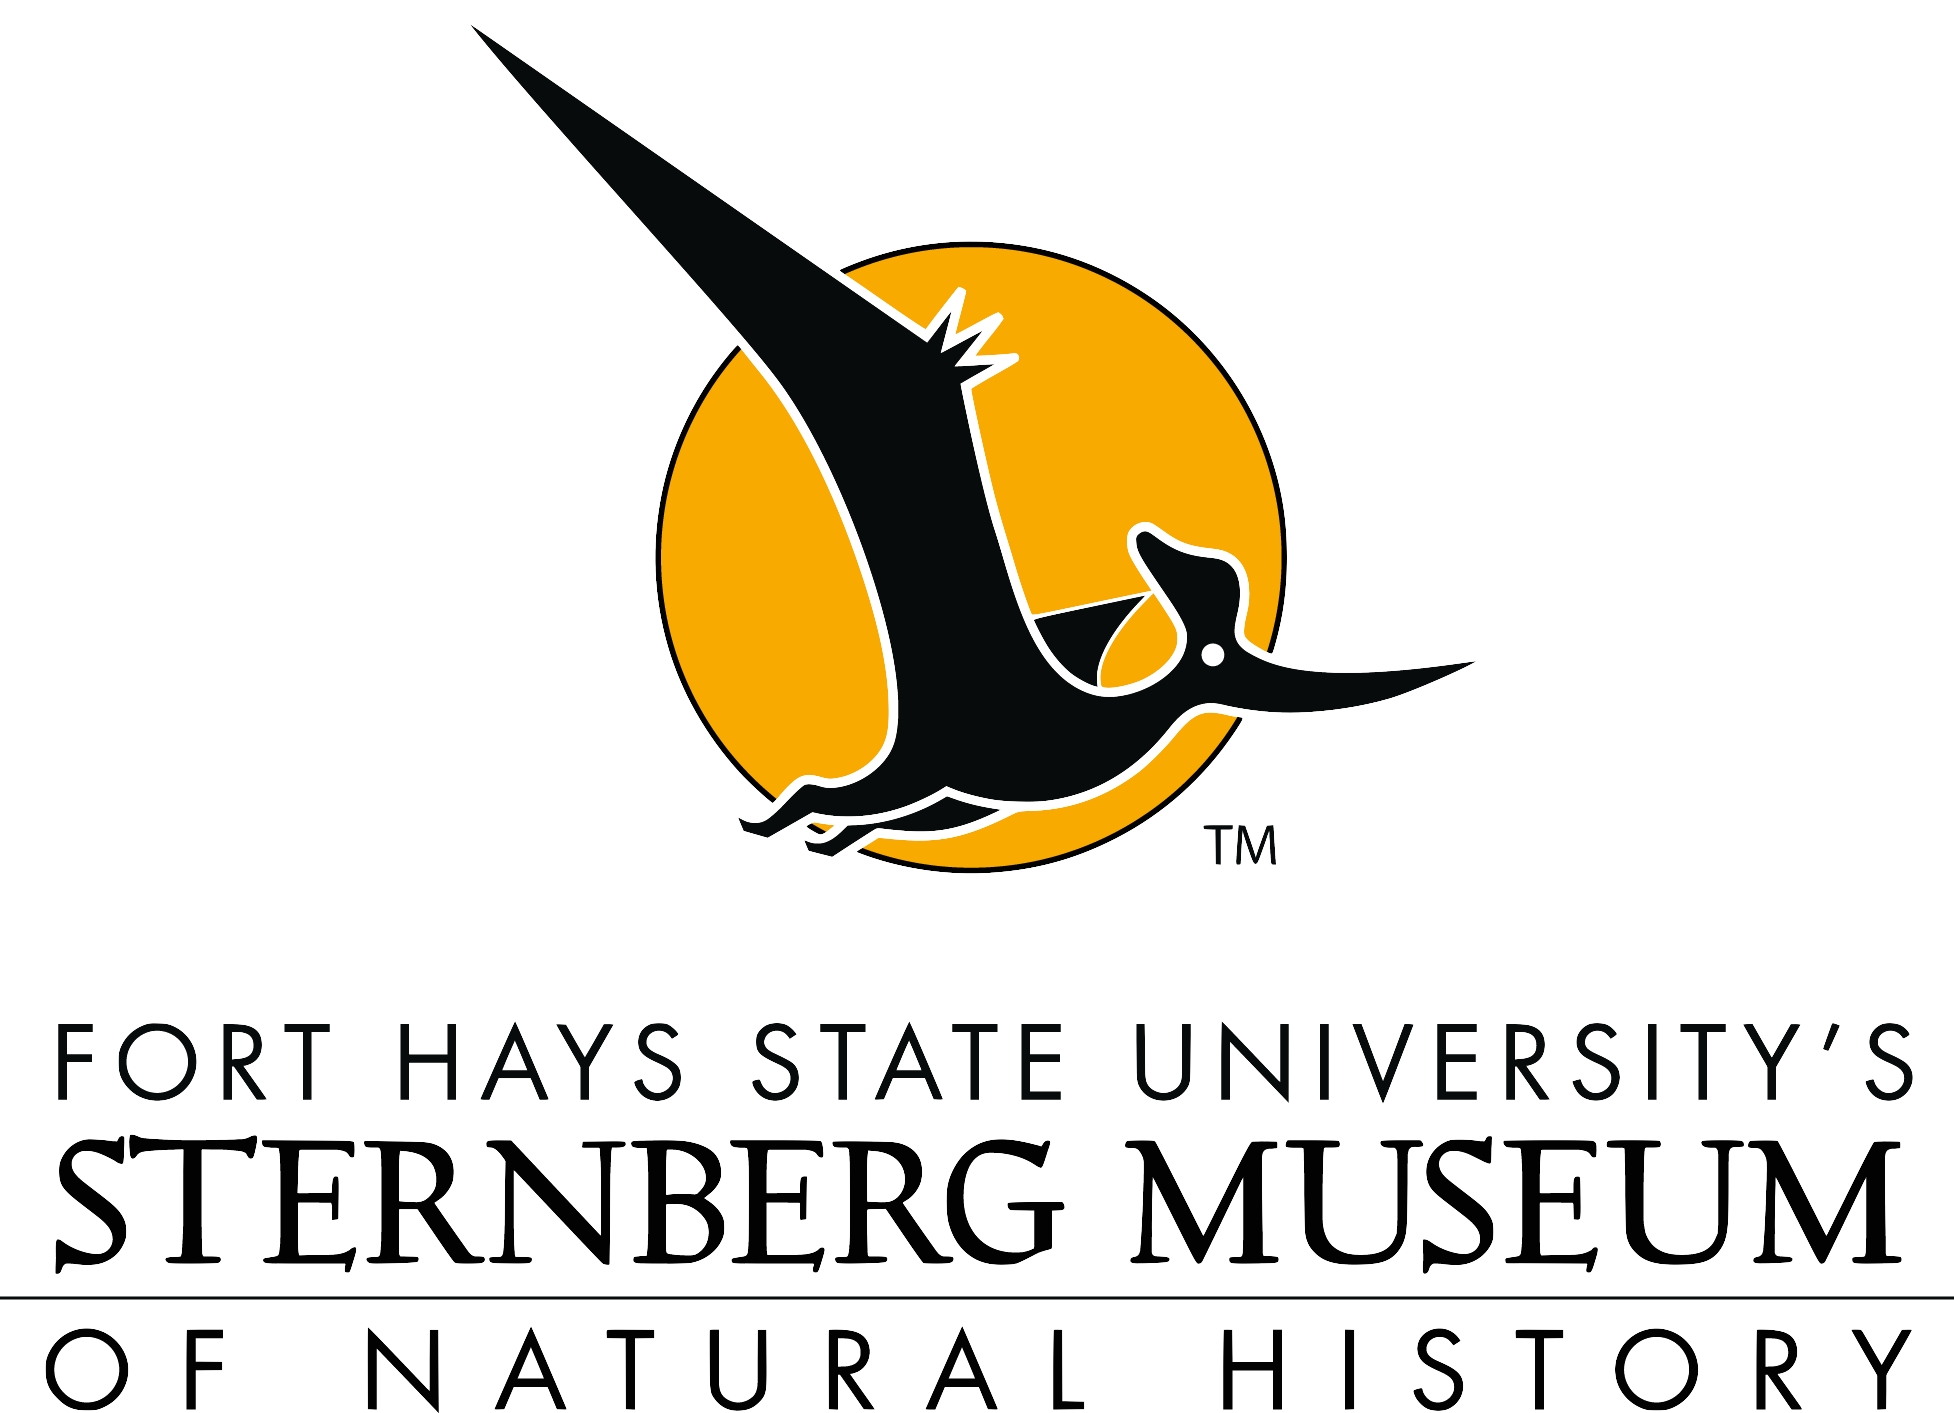 Sternberg Museum of Natural History|Museums|Travel